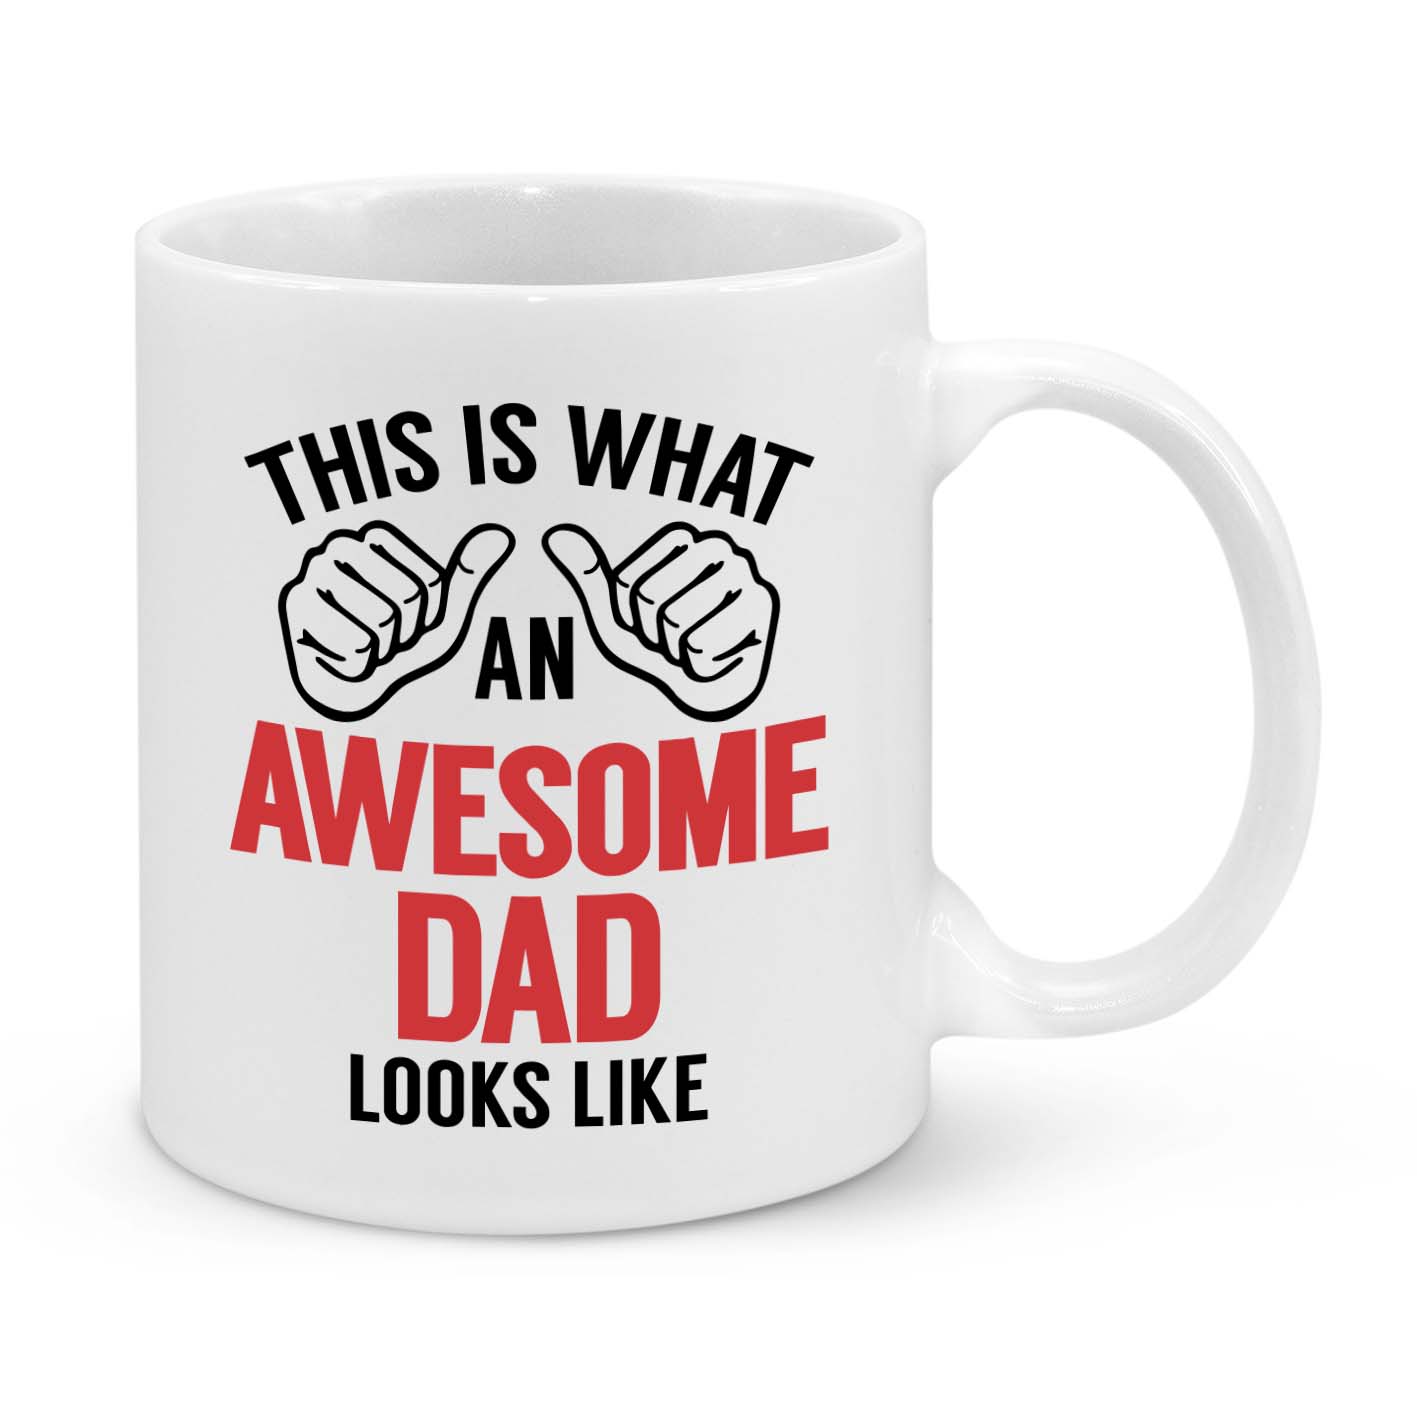 This Is What an Awesome Dad Looks Like Novelty Mug